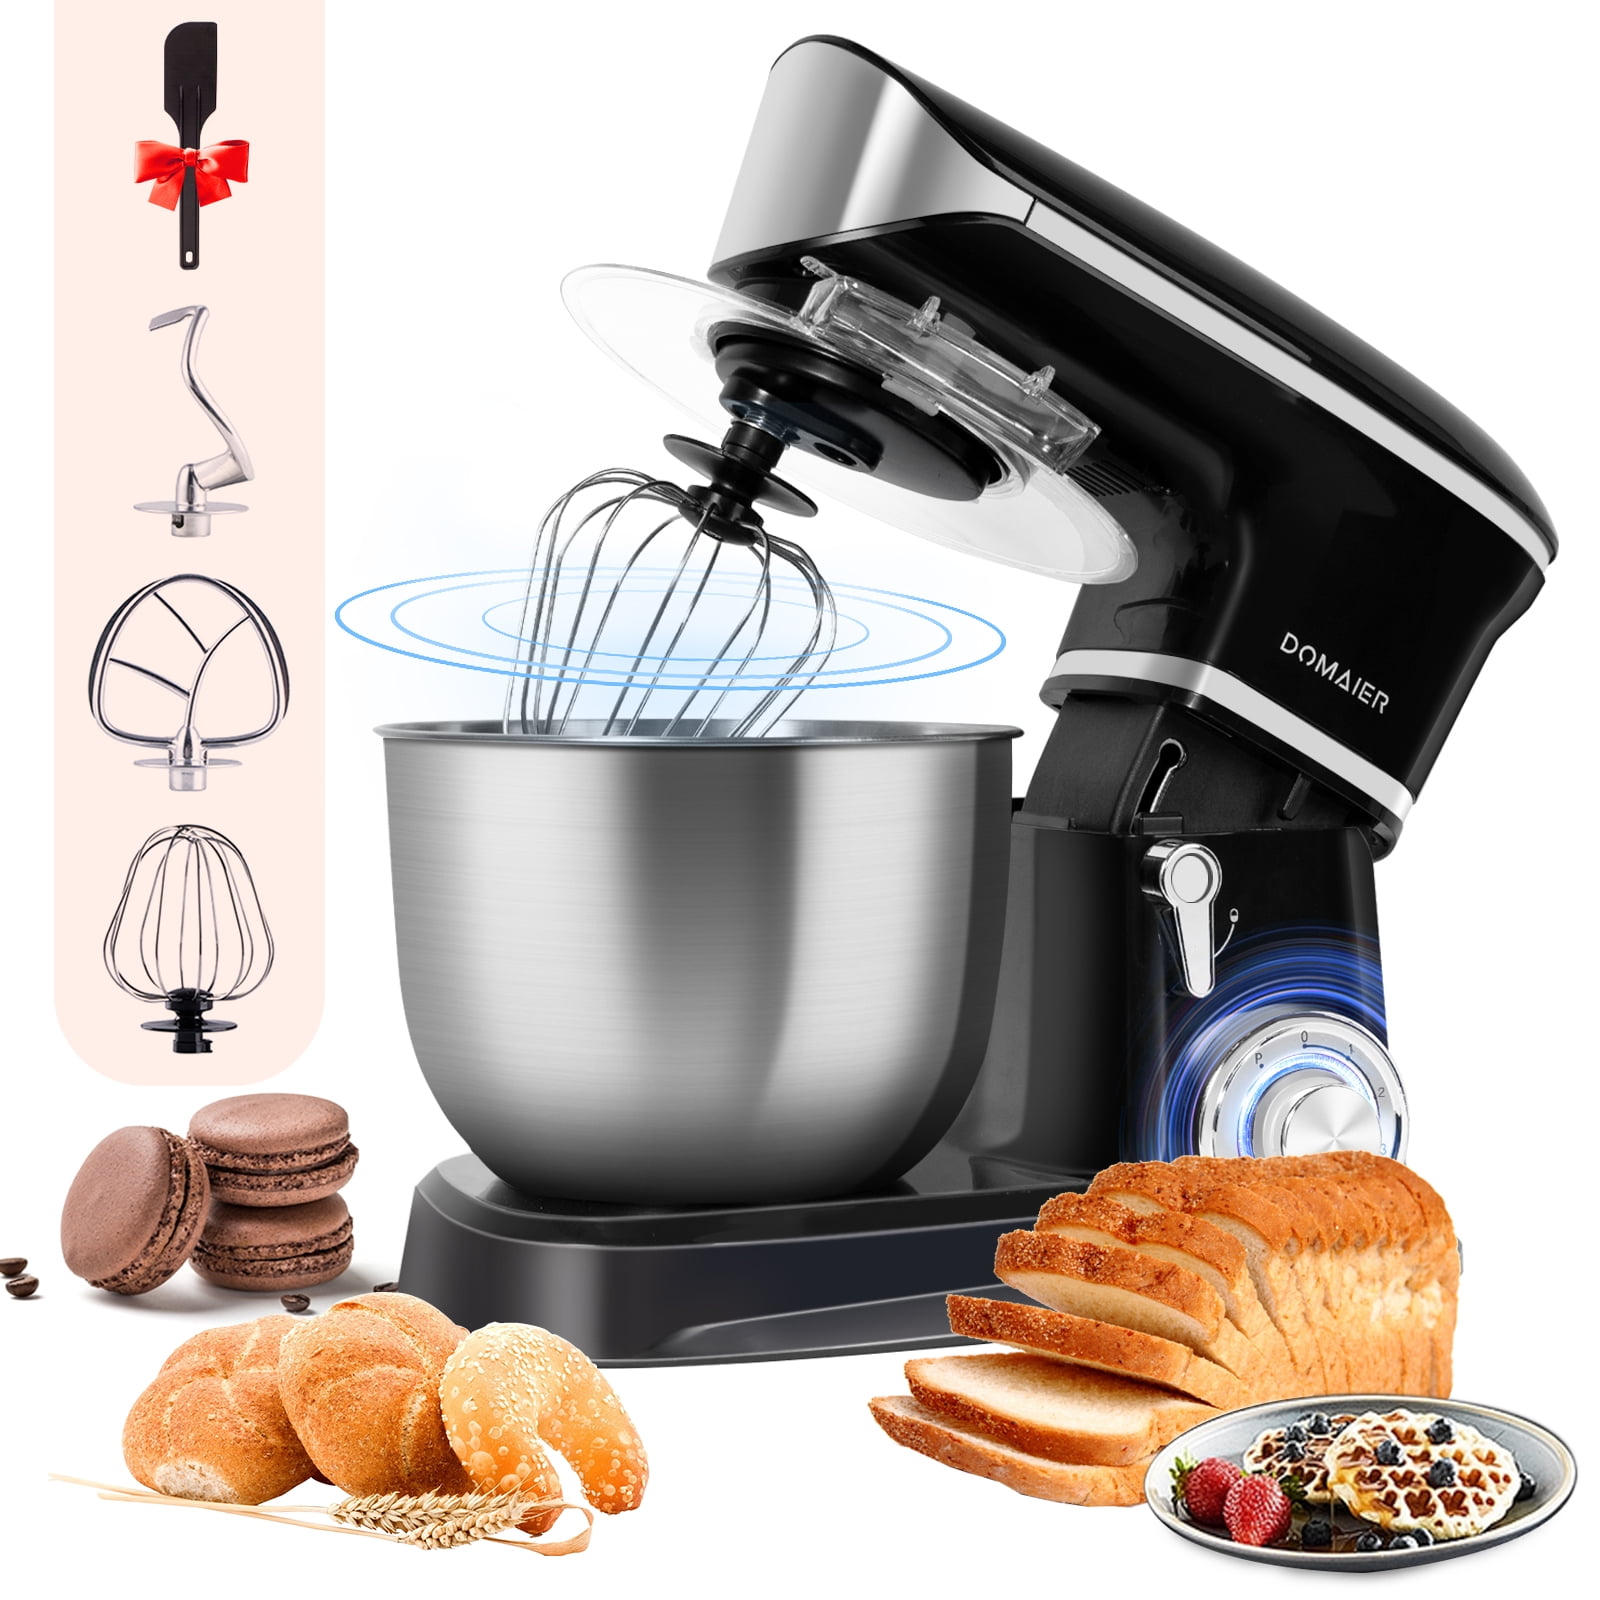 Domaier Household Electric Mixer with 5.5 QT Bowl, 6-Speed 600W Tilt-Head Kitchen Food Mixer with Dough Hook, Flat Beater, Wire Whisk & Pouring Shield, Dishwasher - Walmart.com